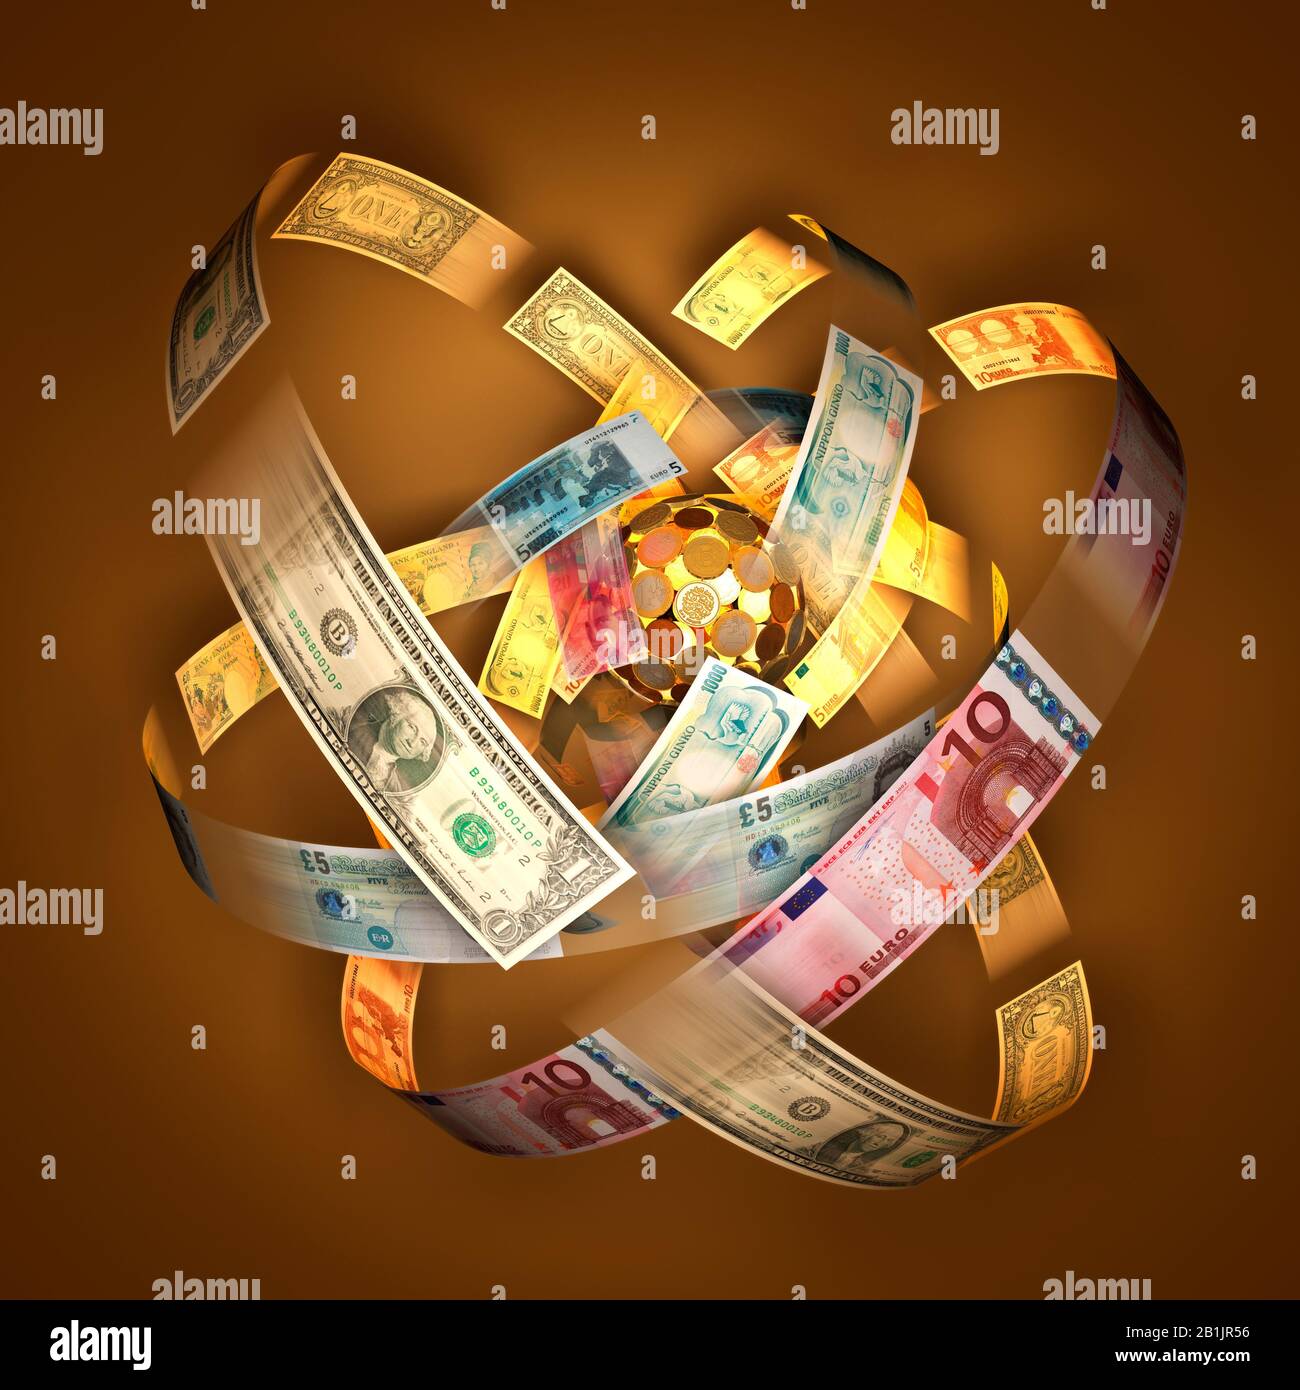 Atomic money. International currencies. Banknotes orbit around a planet made of coins. Stock Photo